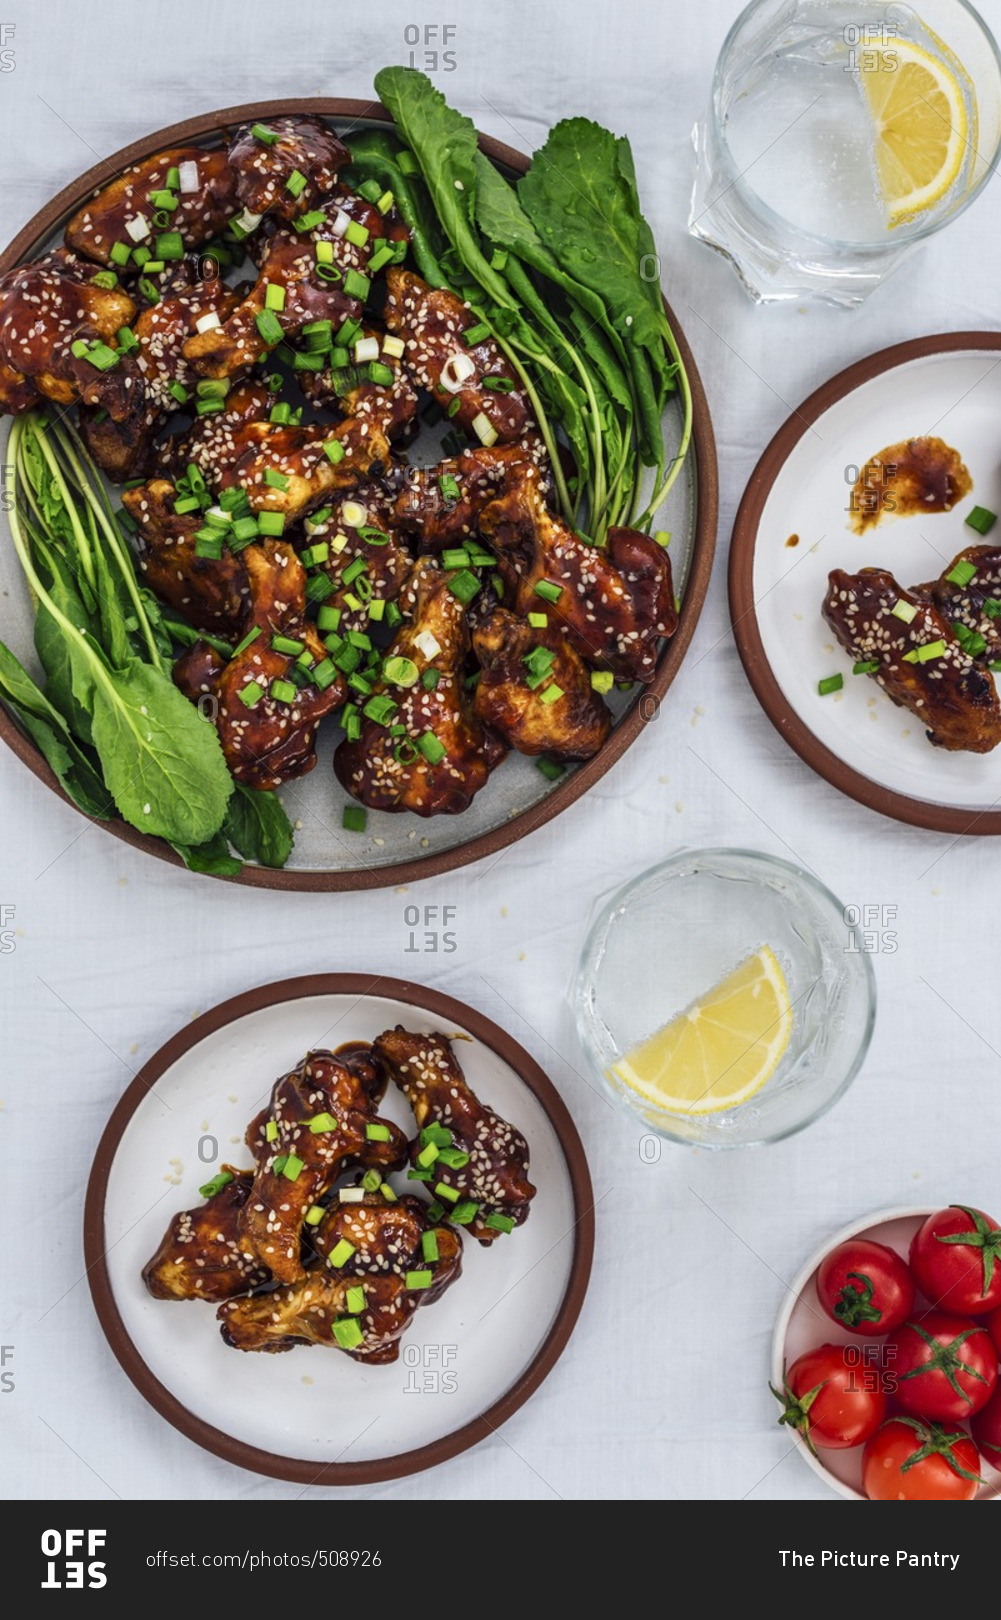 Oven-baked chicken wings with a sticky sauce and sesame seeds served with herbs on one large plate and two small plates accompanied by soda with lemon and cherry tomatoes.